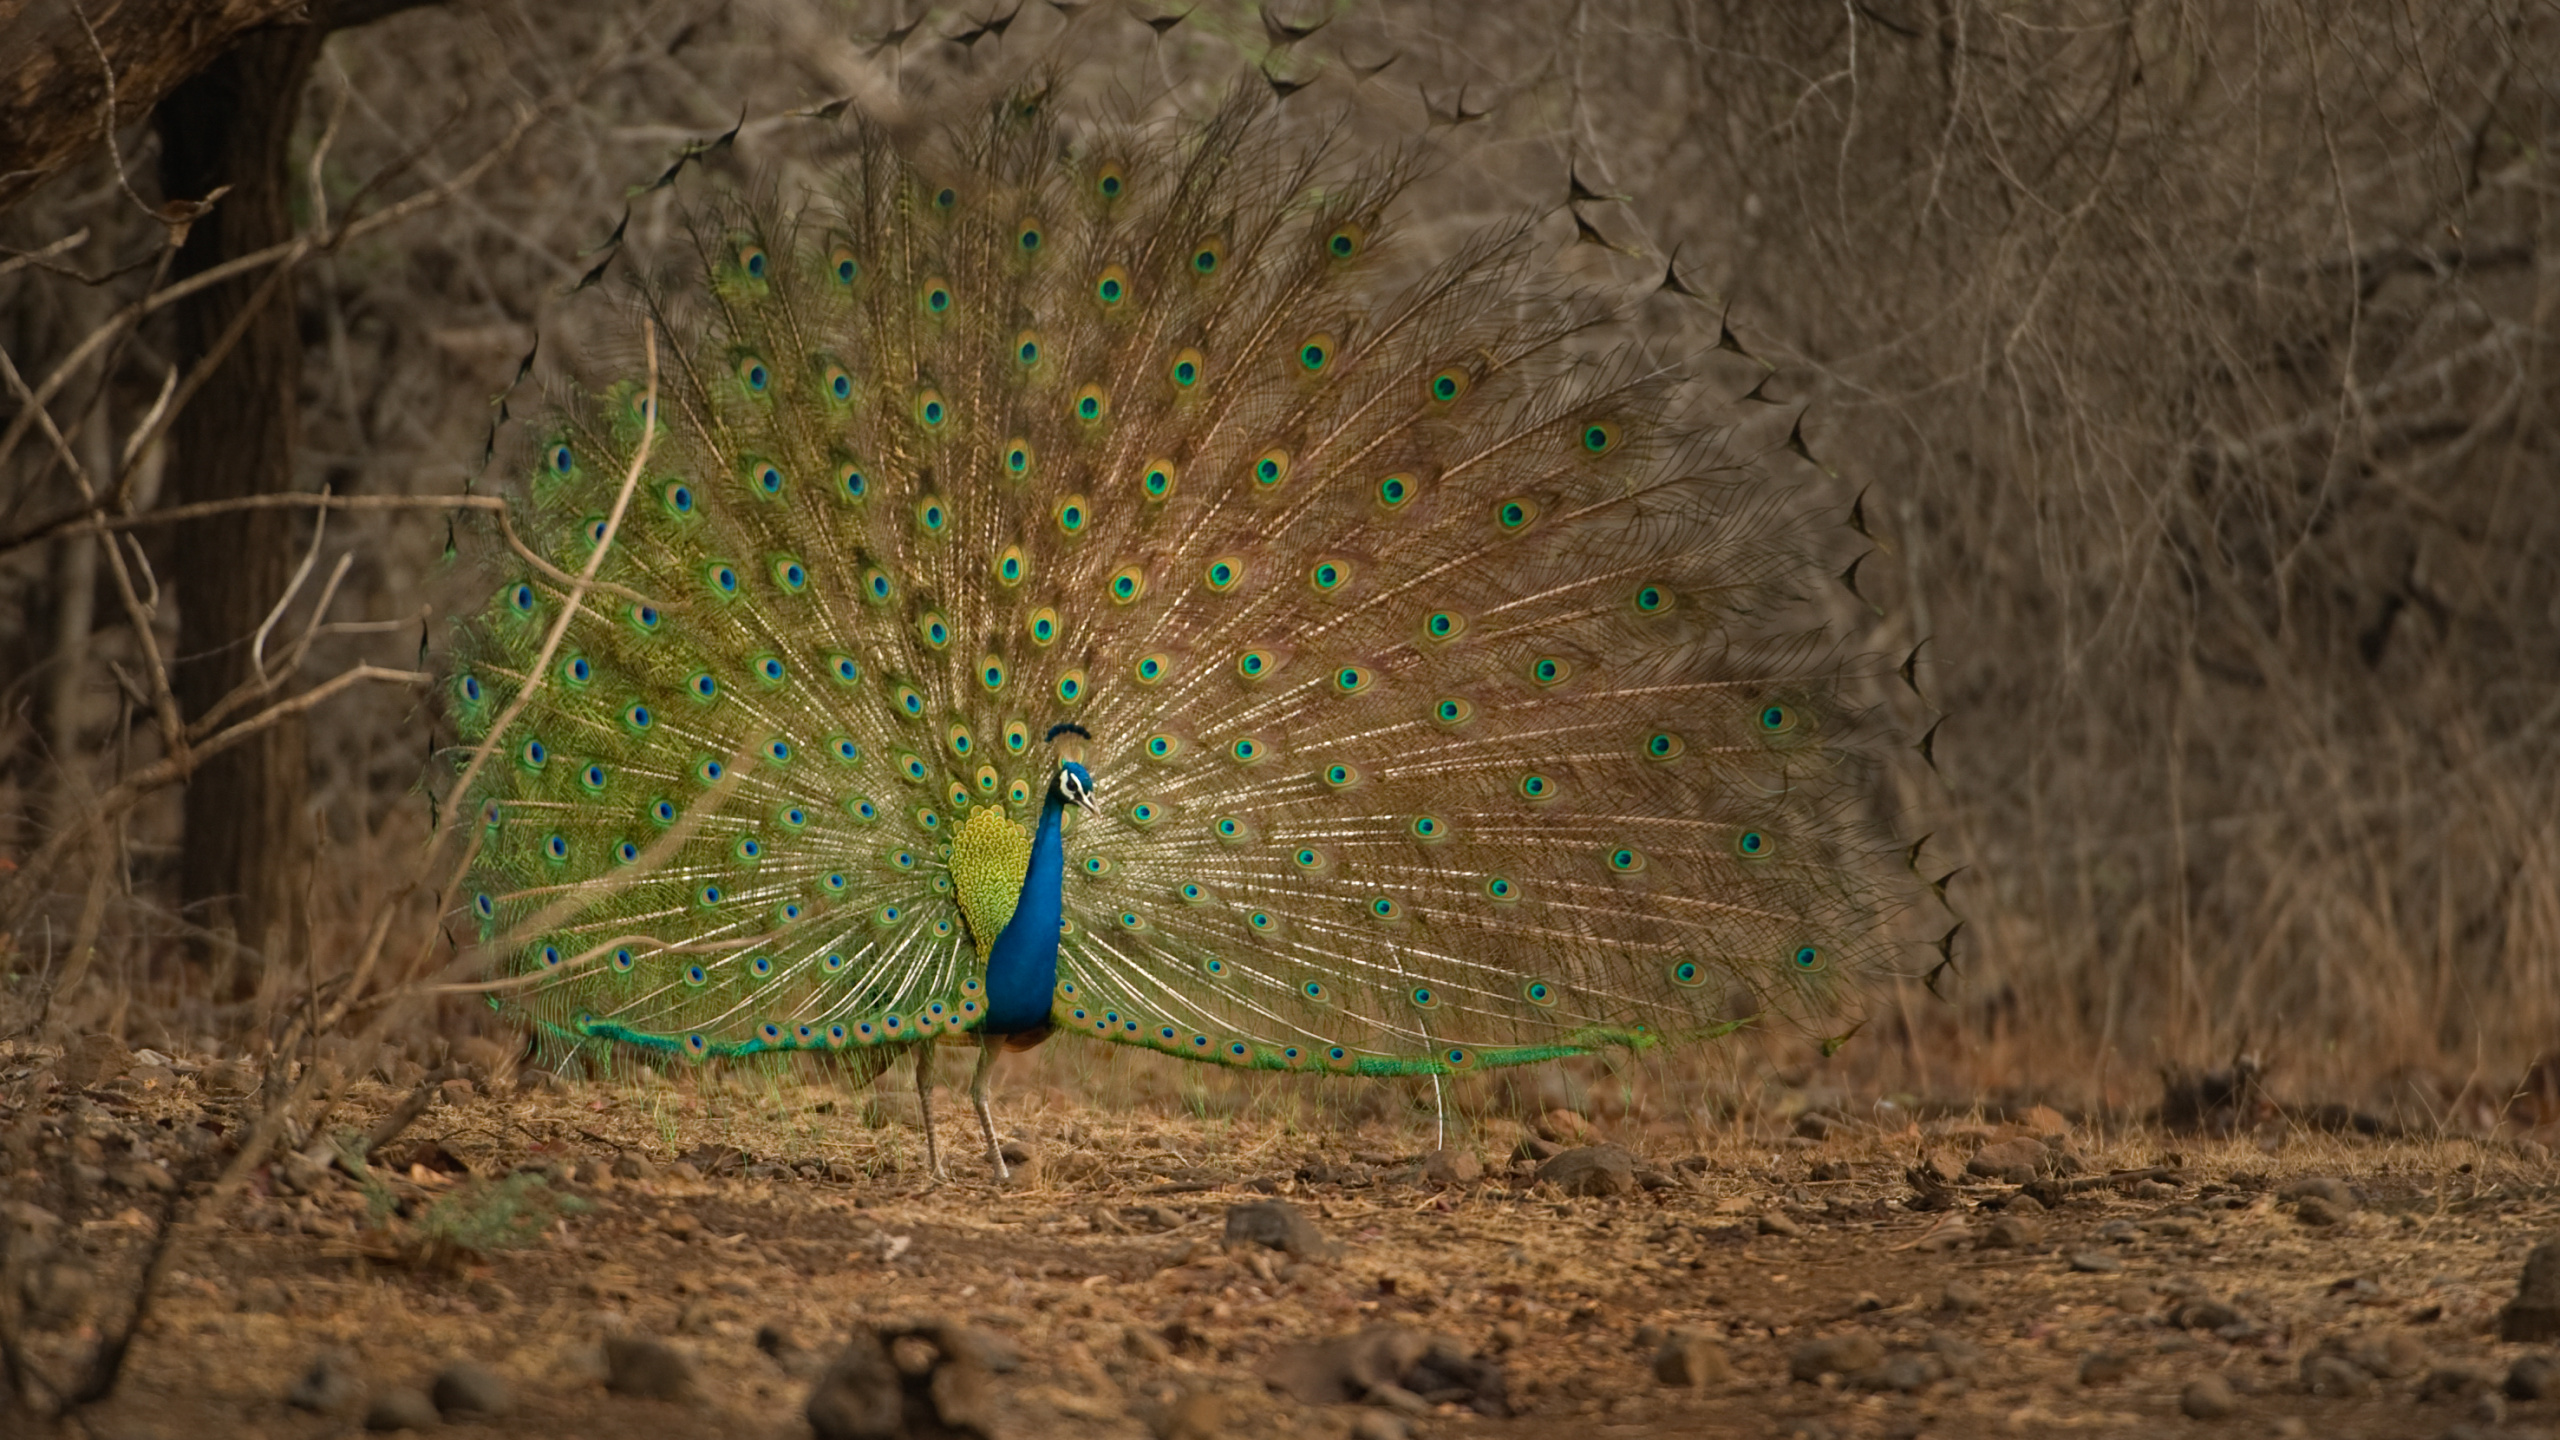 Peacock on Brown Soil Near Bare Trees During Daytime. Wallpaper in 2560x1440 Resolution